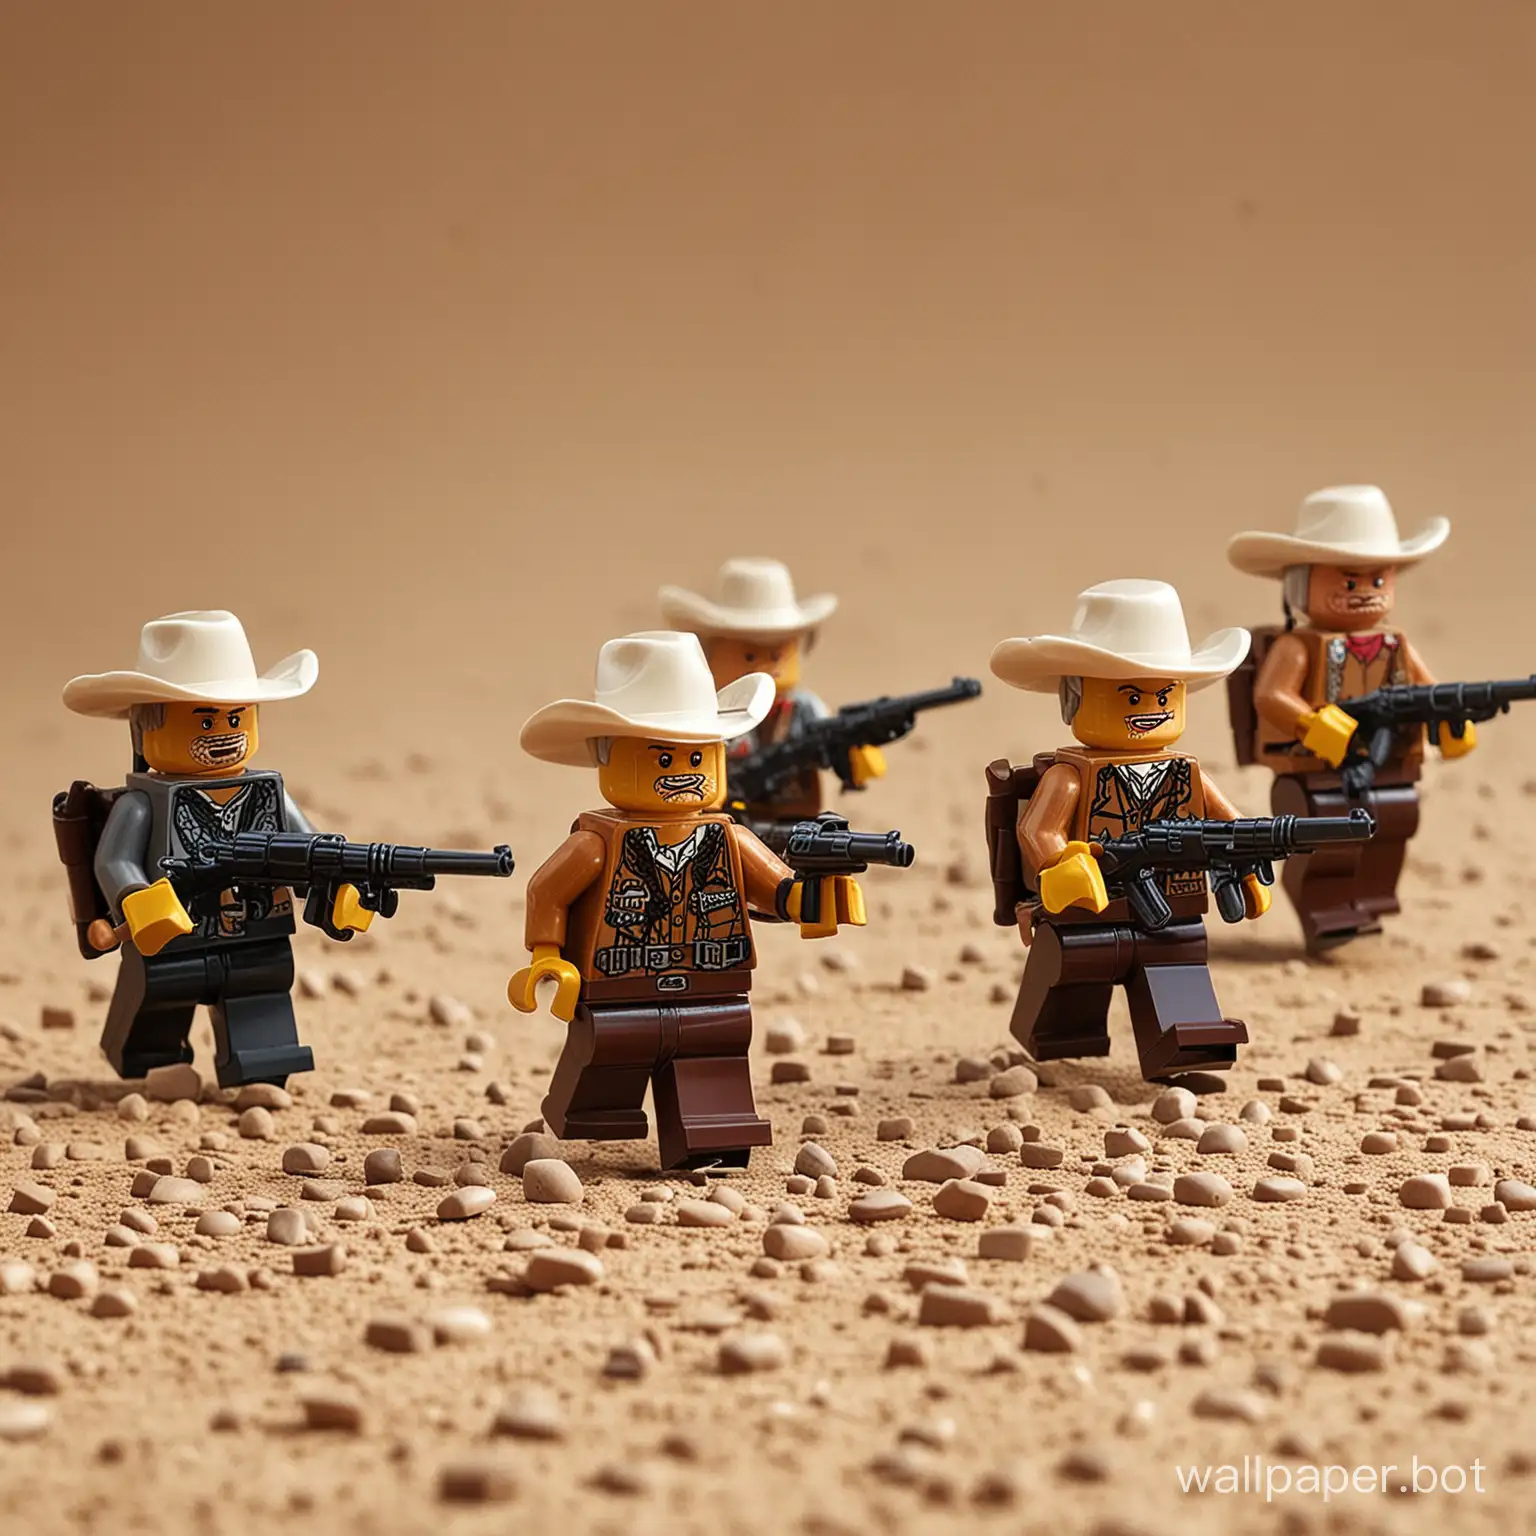 Lego-Cowboys-Running-with-Guns-ActionPacked-Toy-Western-Scene